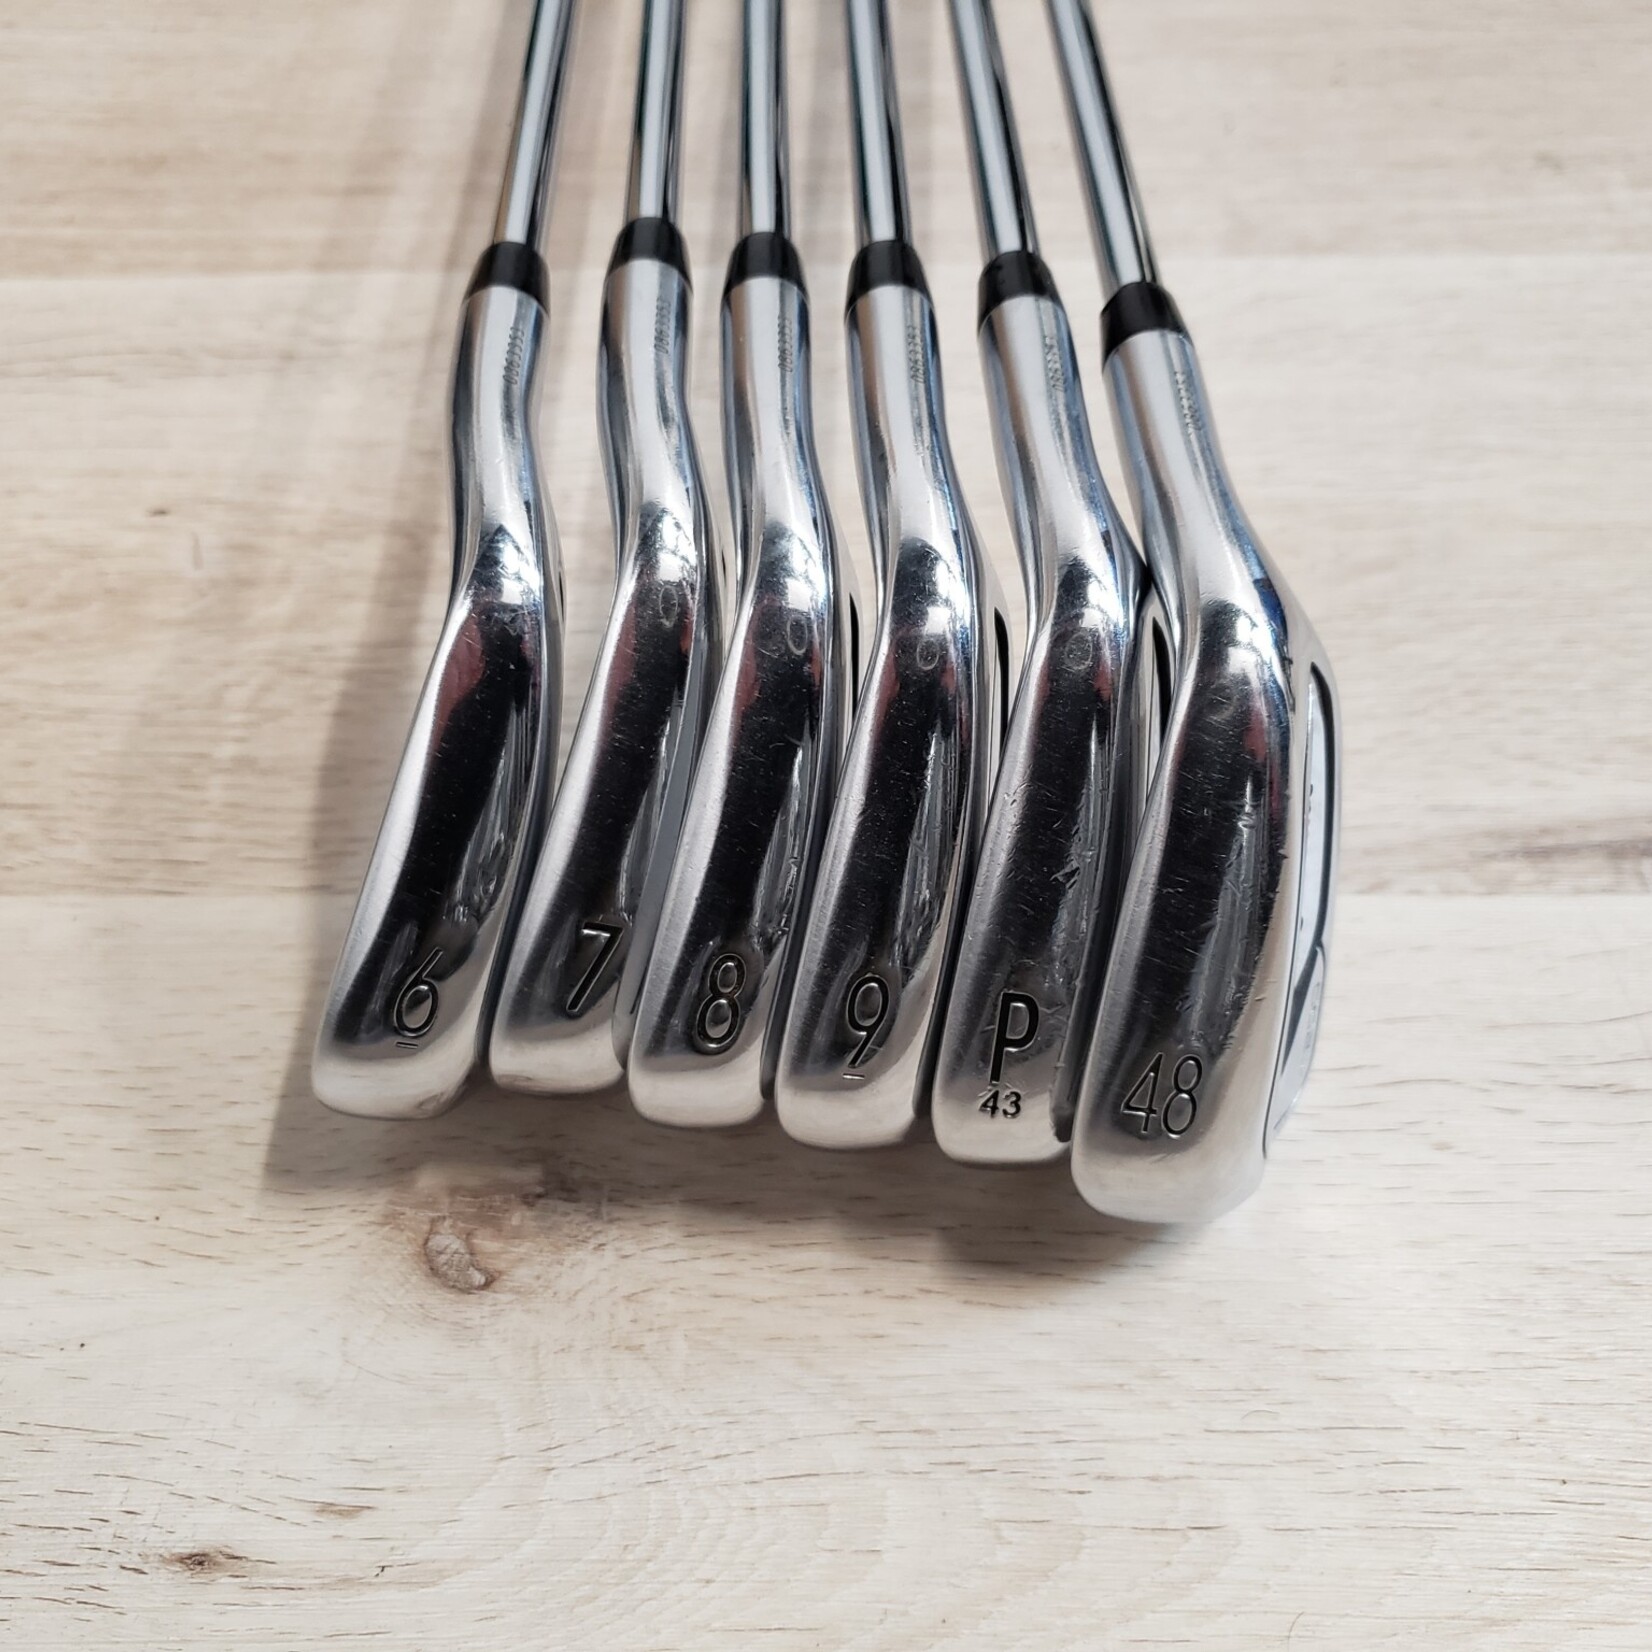 Pre-owned) Titleist T200 Iron Set 6-PW, 48* AMT Red Regular Flex 